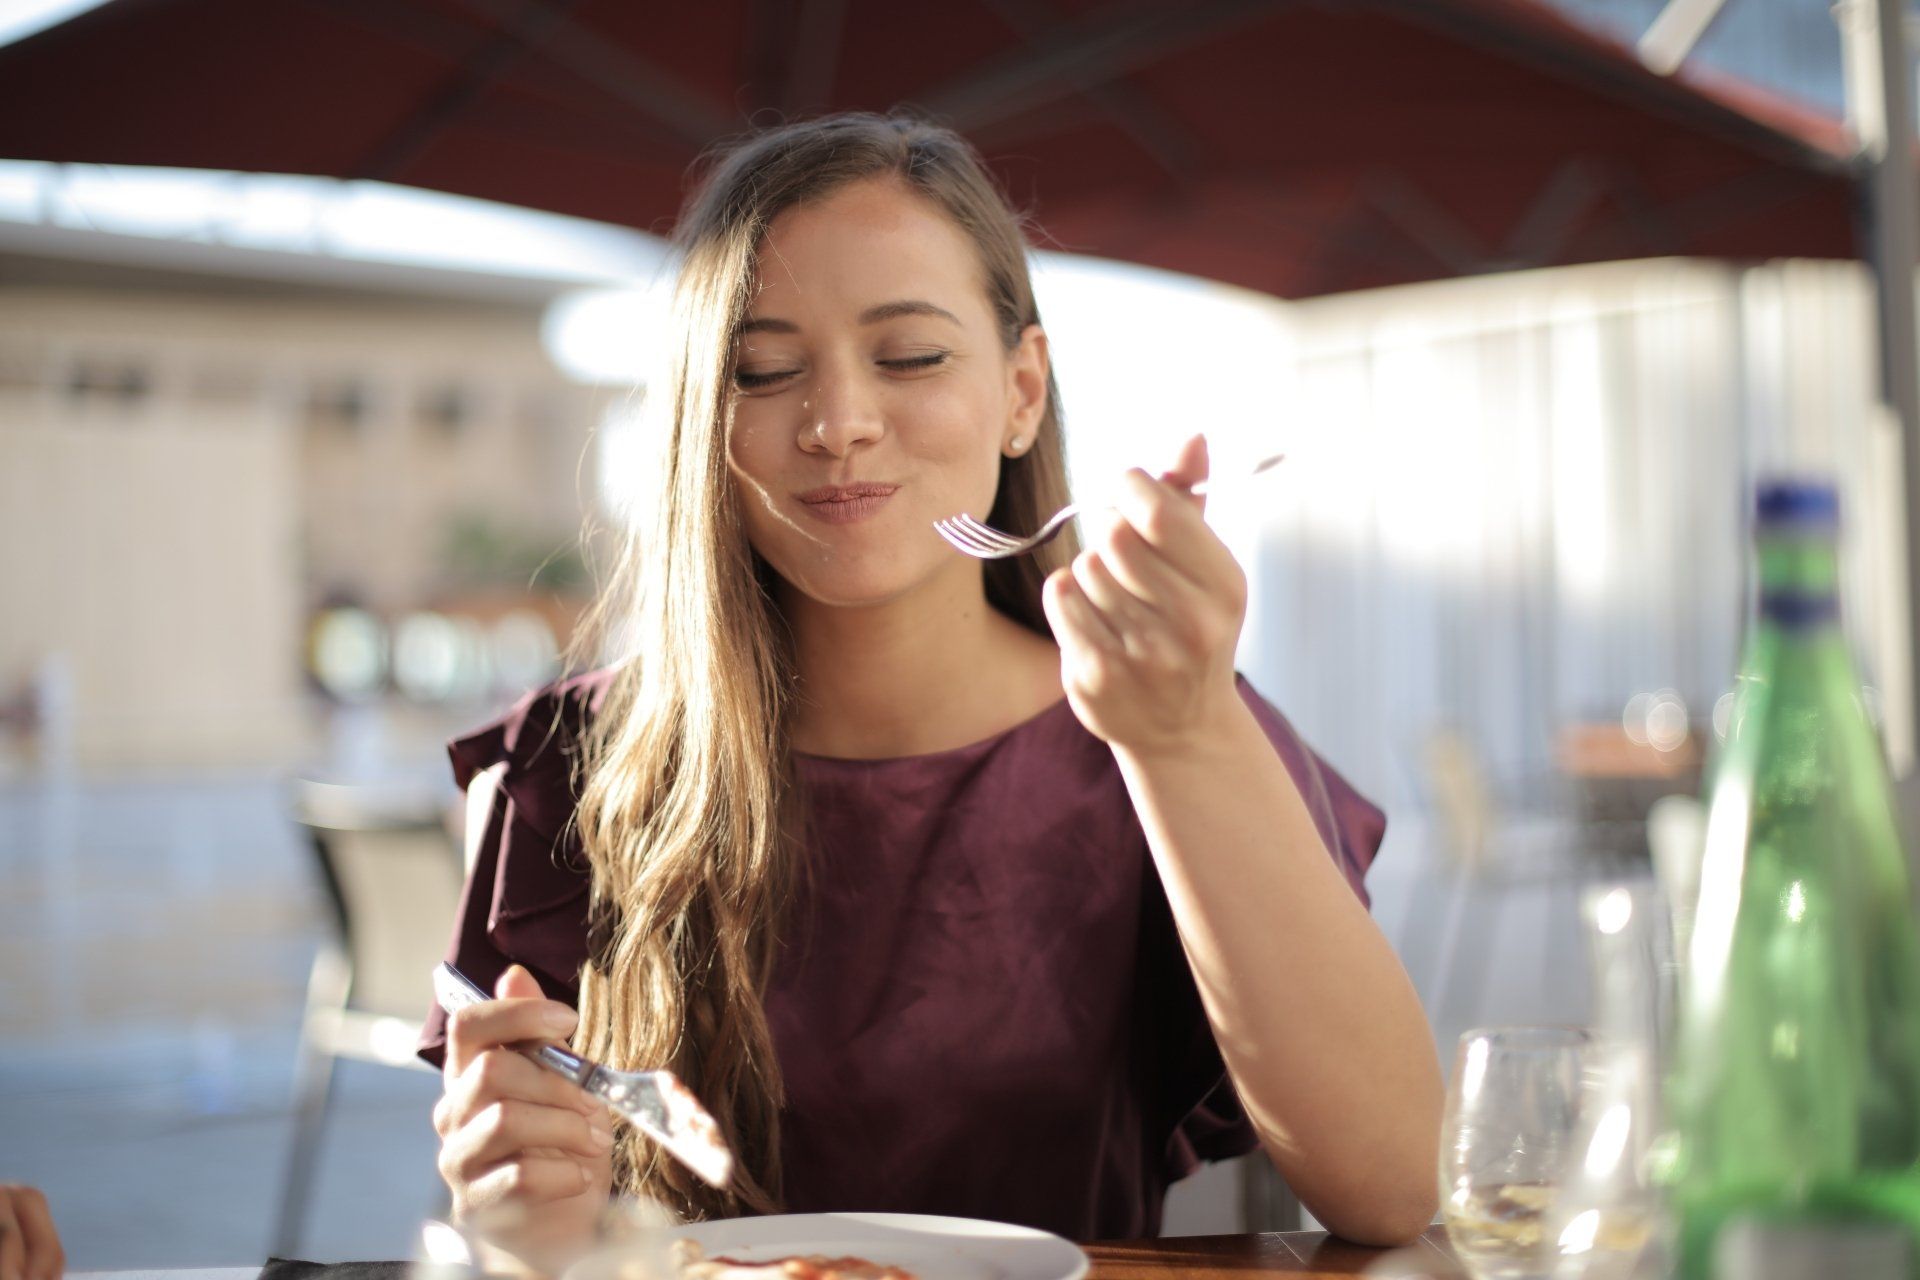 A woman is sitting at a table eating a plate of food with a fork.